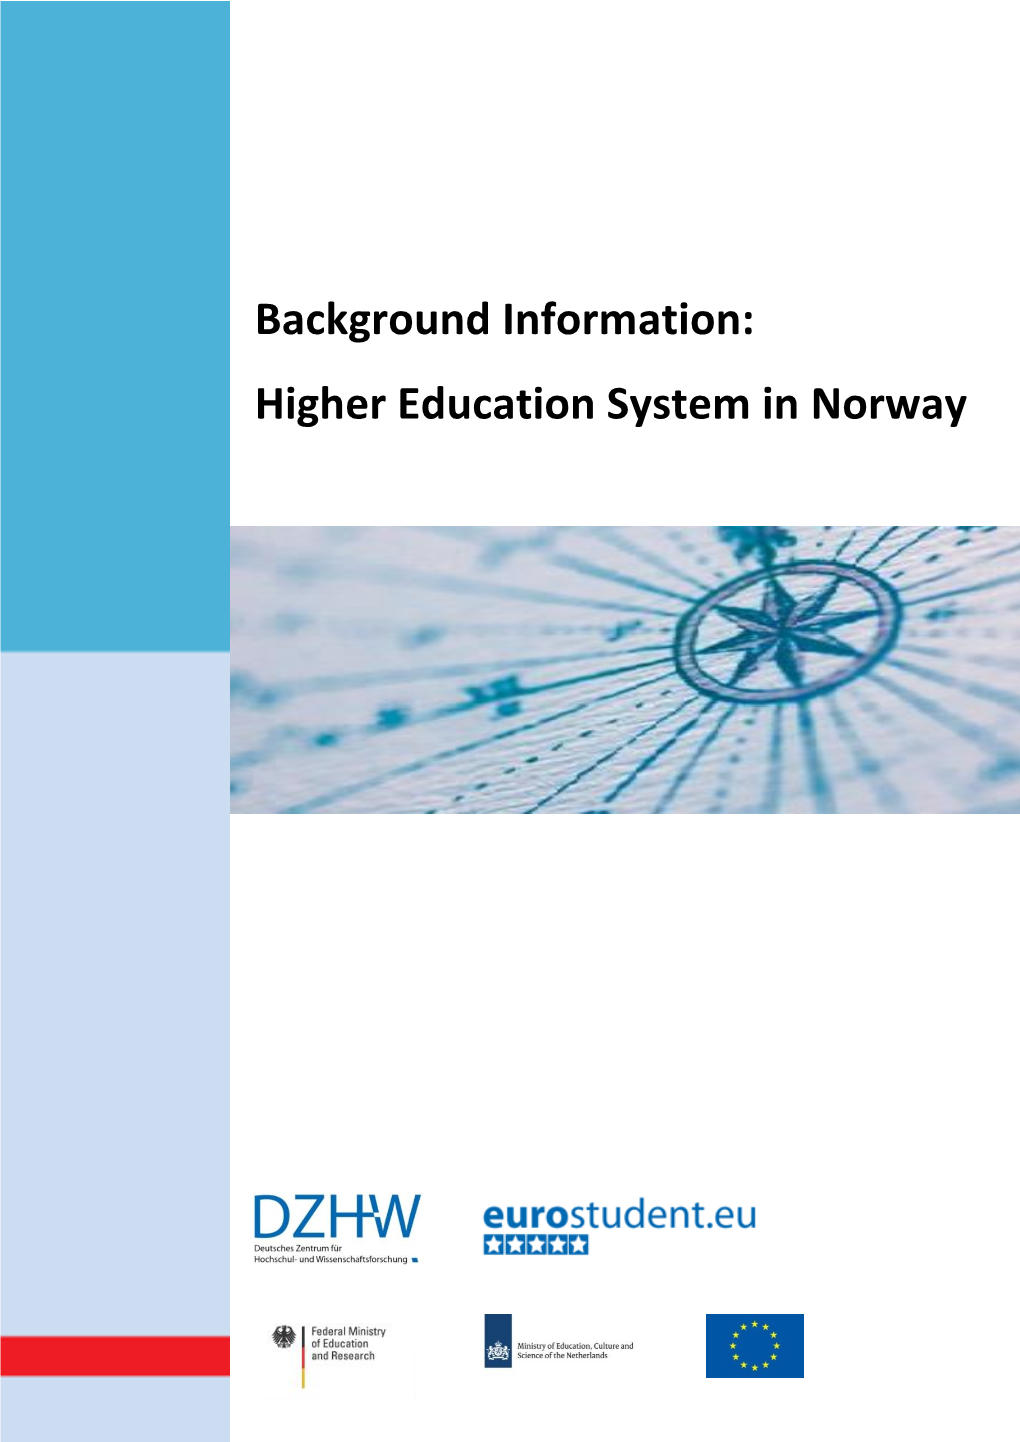 Background Information: Higher Education System in Norway